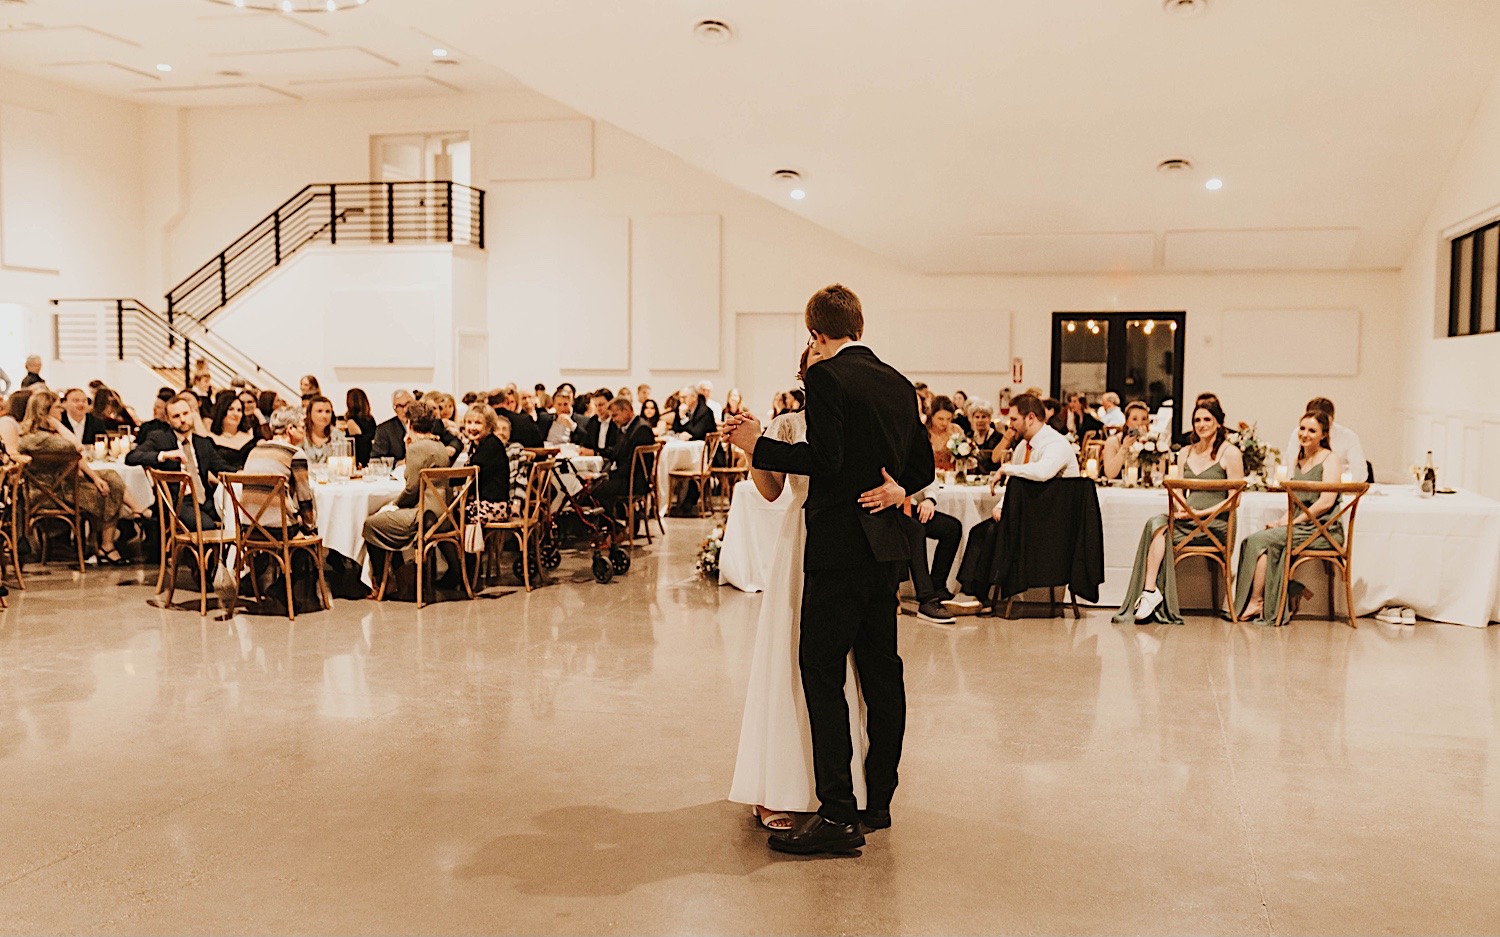 A bride and groom share their first dance together while guests watch during their indoor reception at Woodhaven Weddings + Events